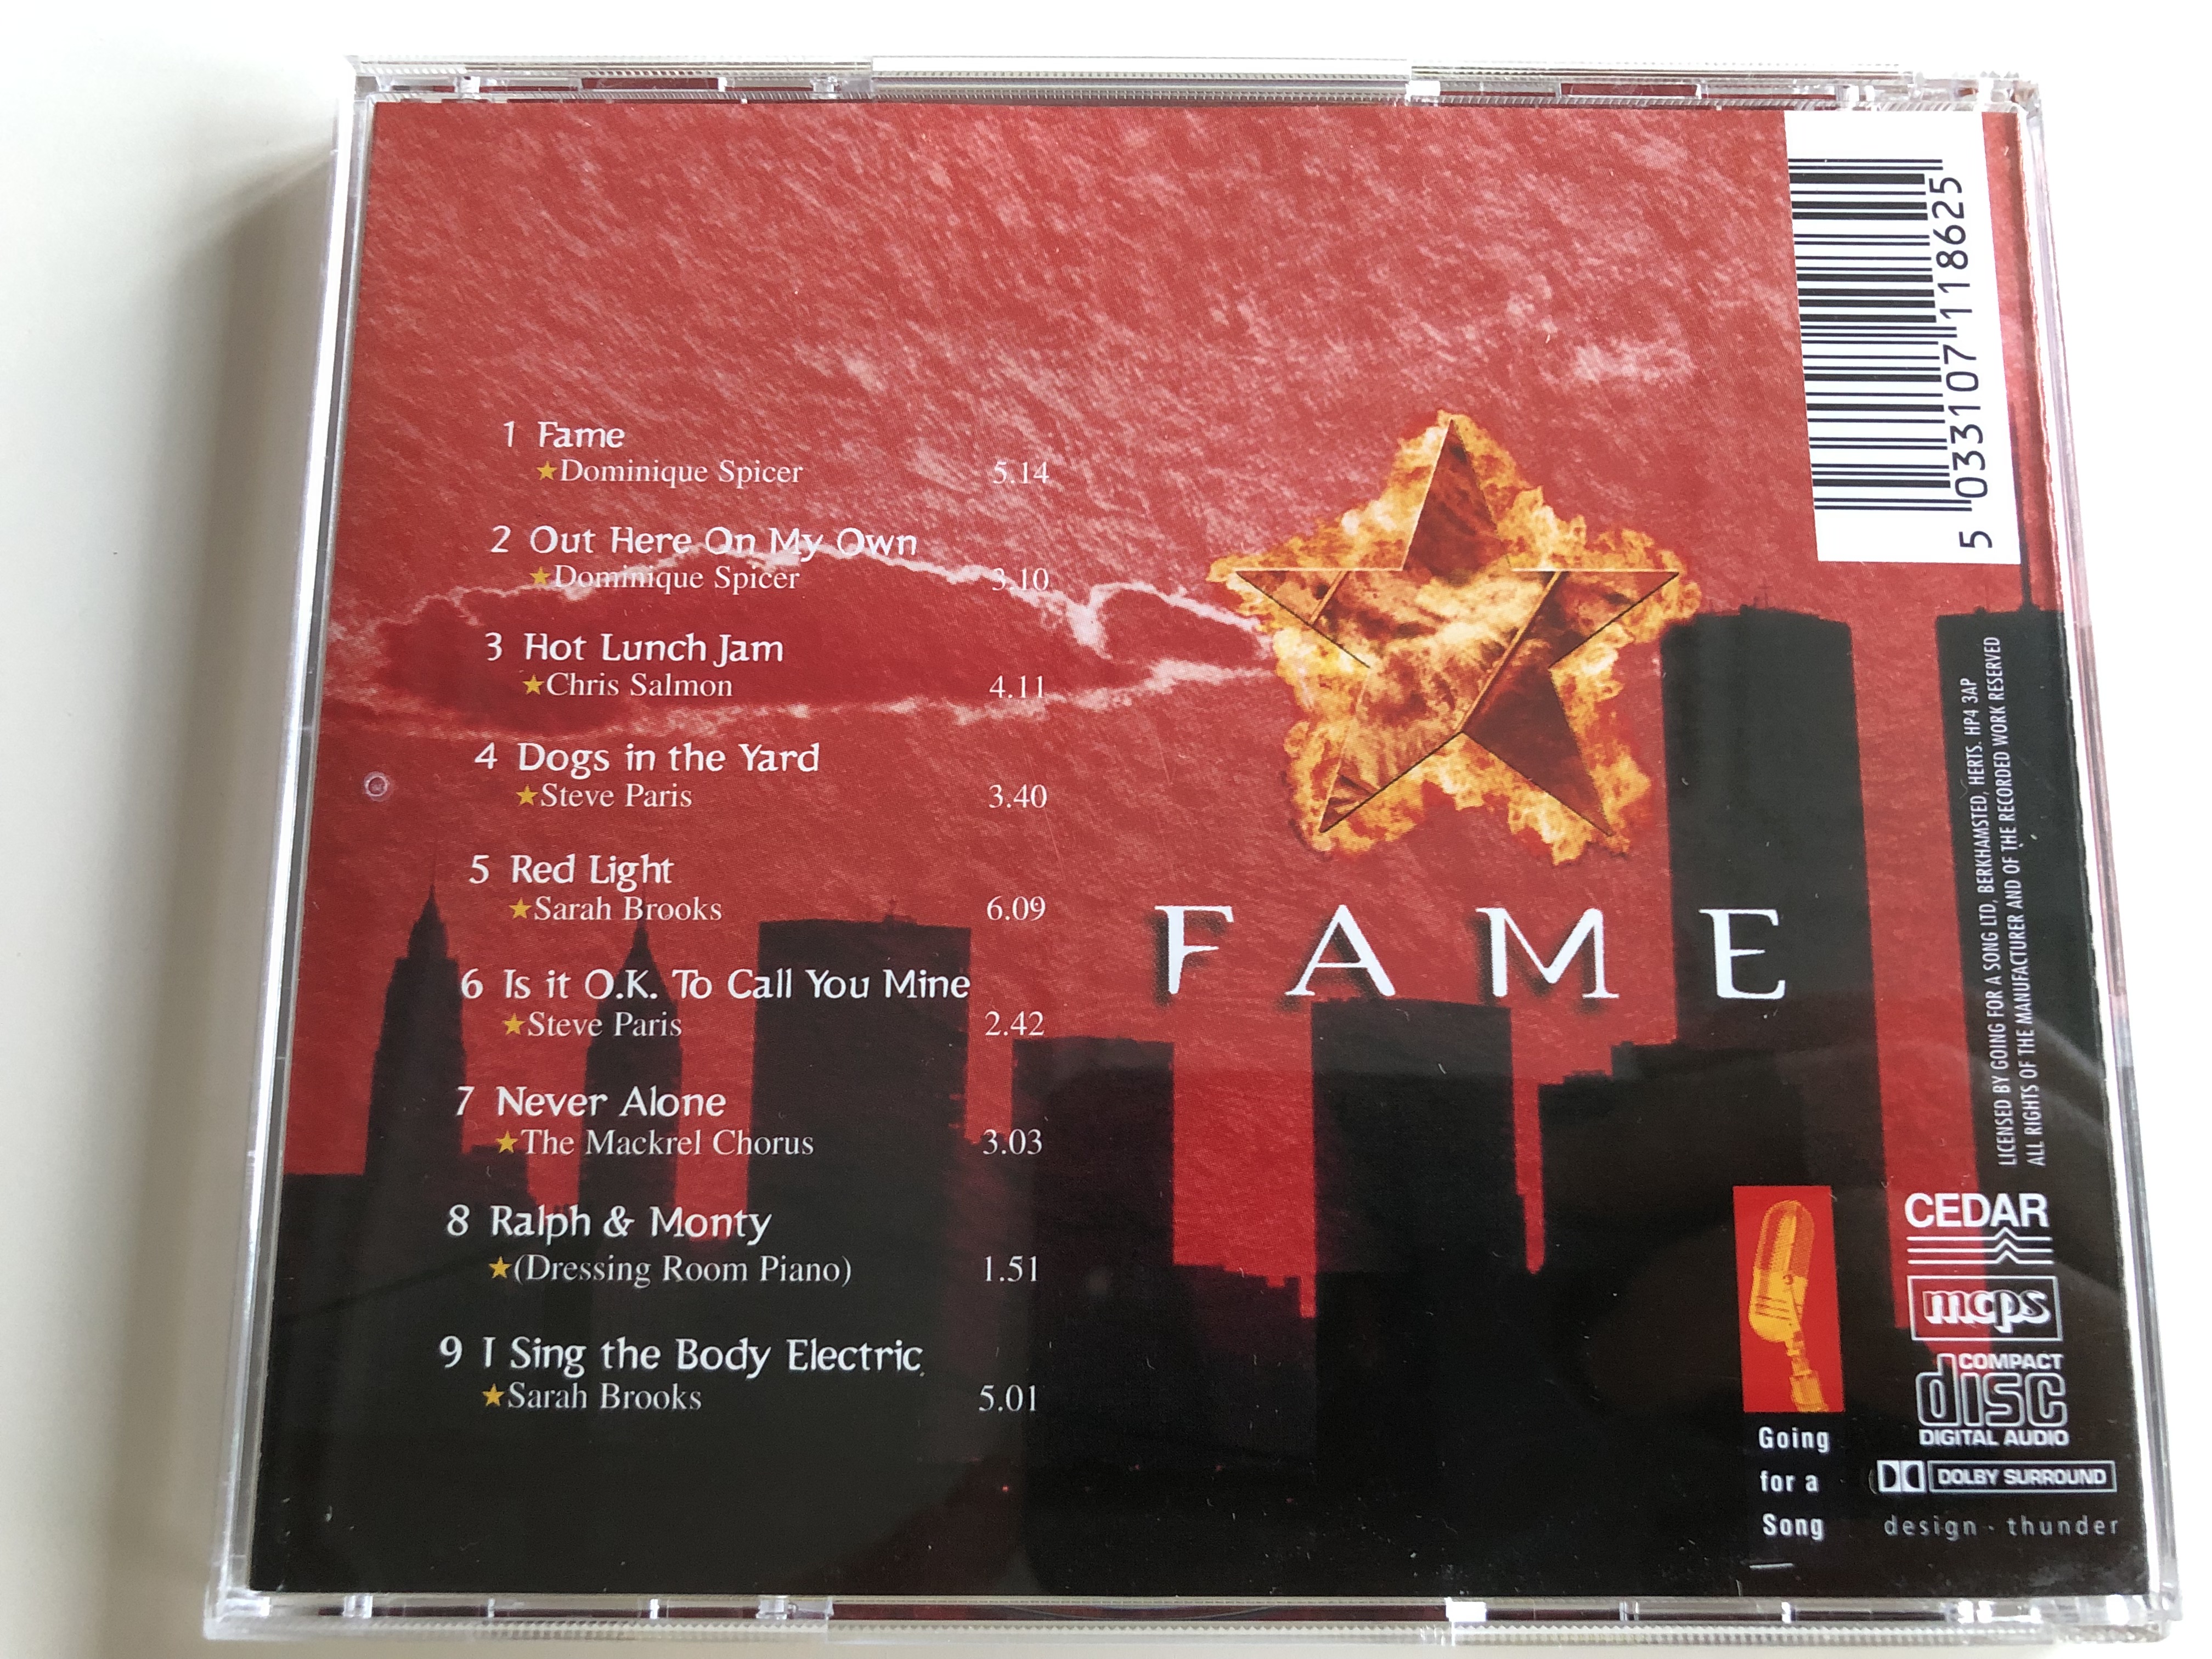 fame-performed-by-c.c-productions-includes-fame-out-there-on-my-own-red-light-is-it-okay-to-call-you-mine-the-energy-the-excitement-gfs186-5-.jpg